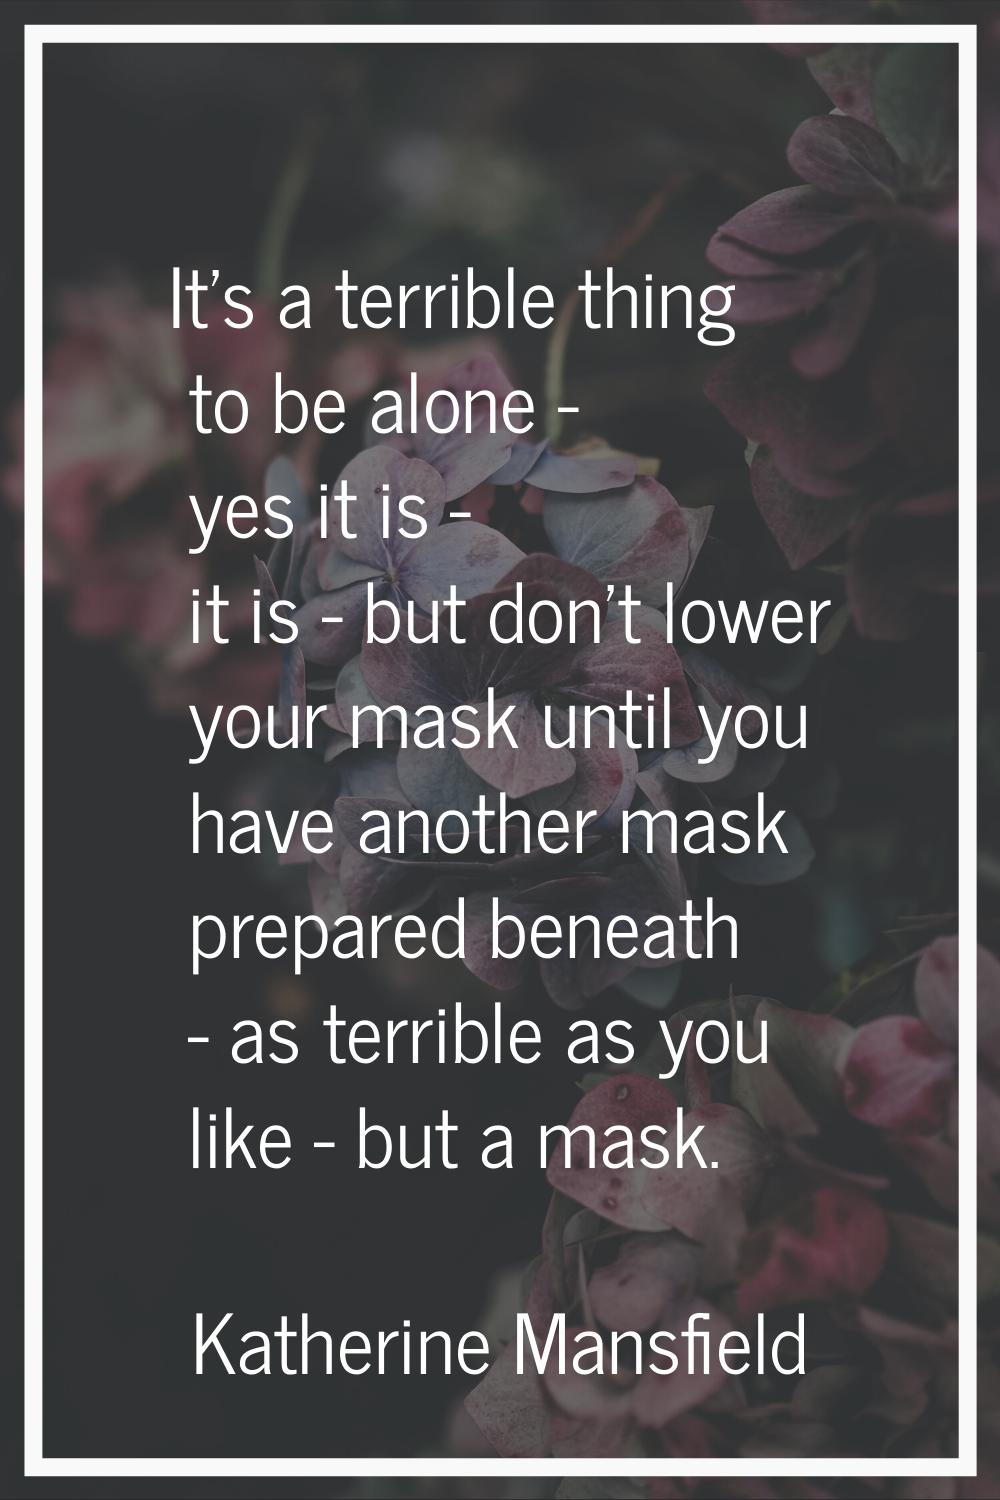 It's a terrible thing to be alone - yes it is - it is - but don't lower your mask until you have an